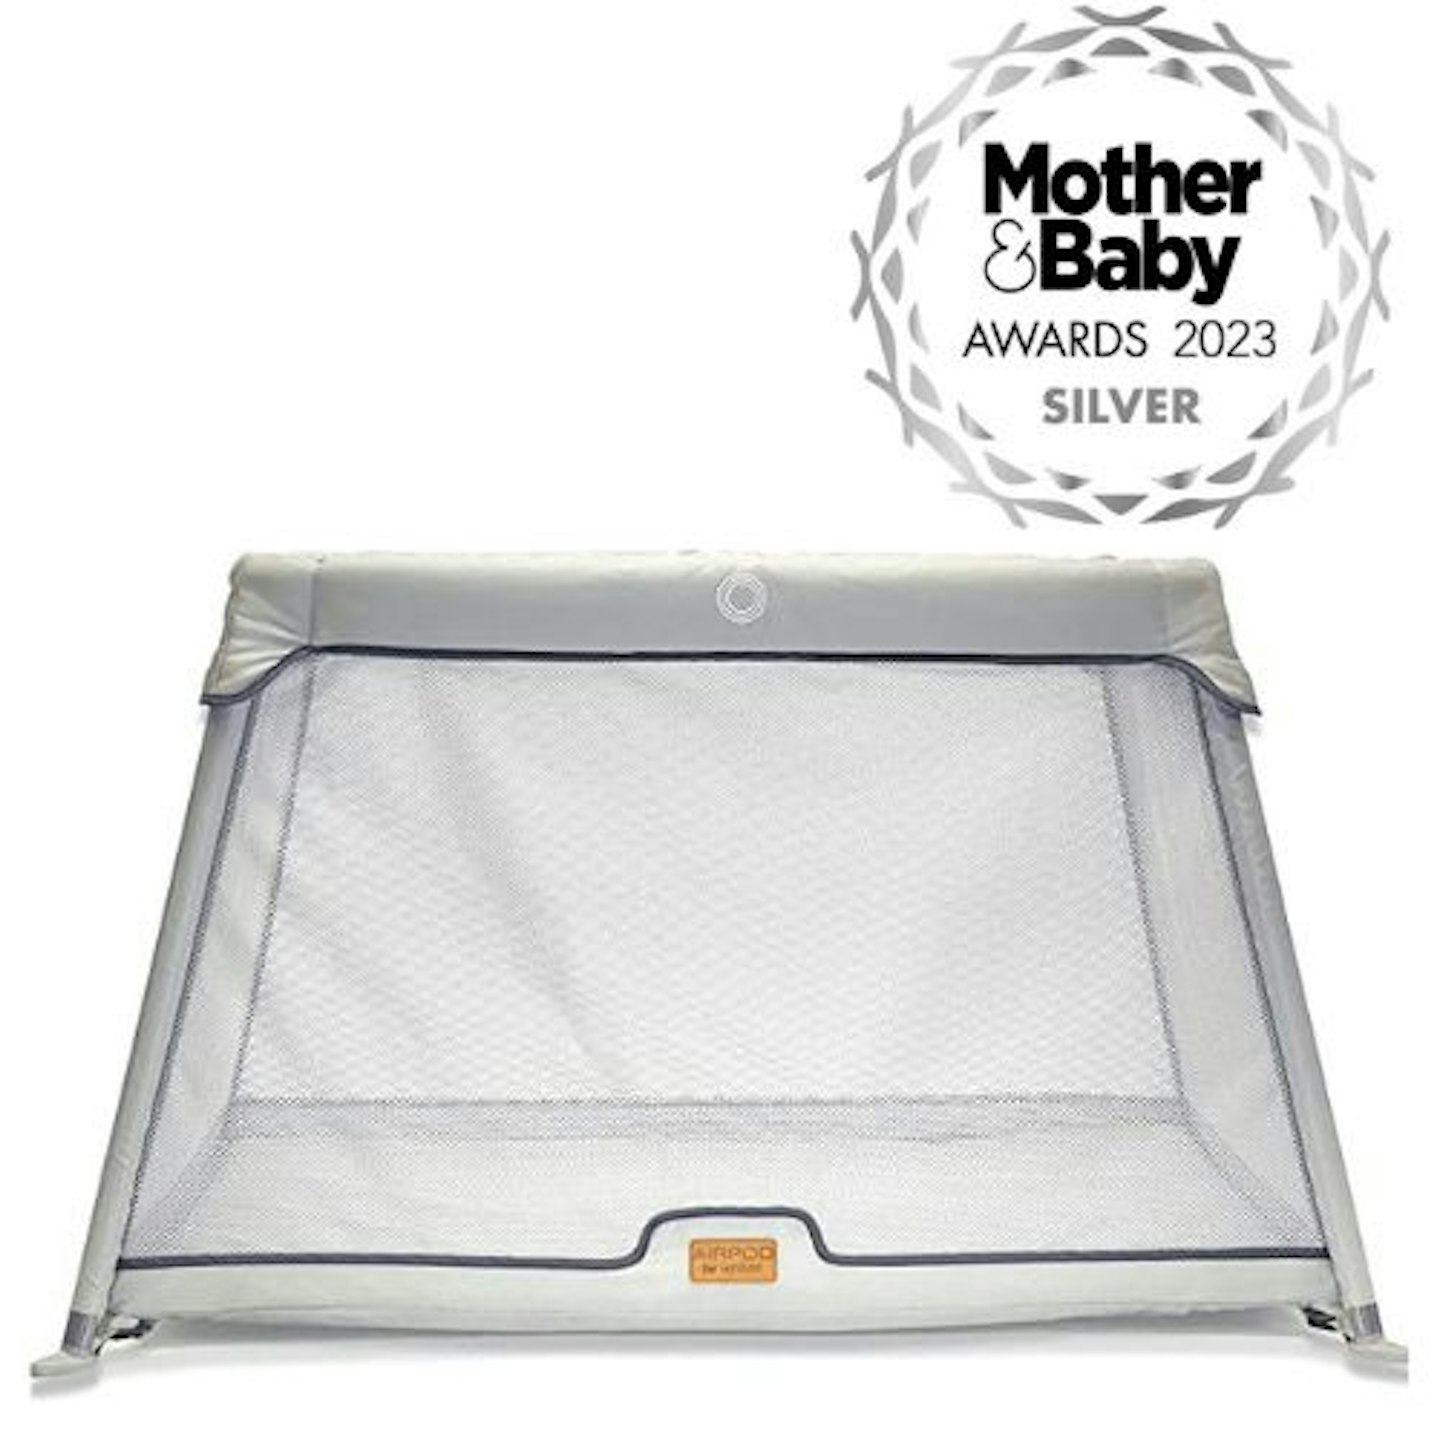 Airpod Lightweight Baby & Toddler Travel Cot - Silver – Venture